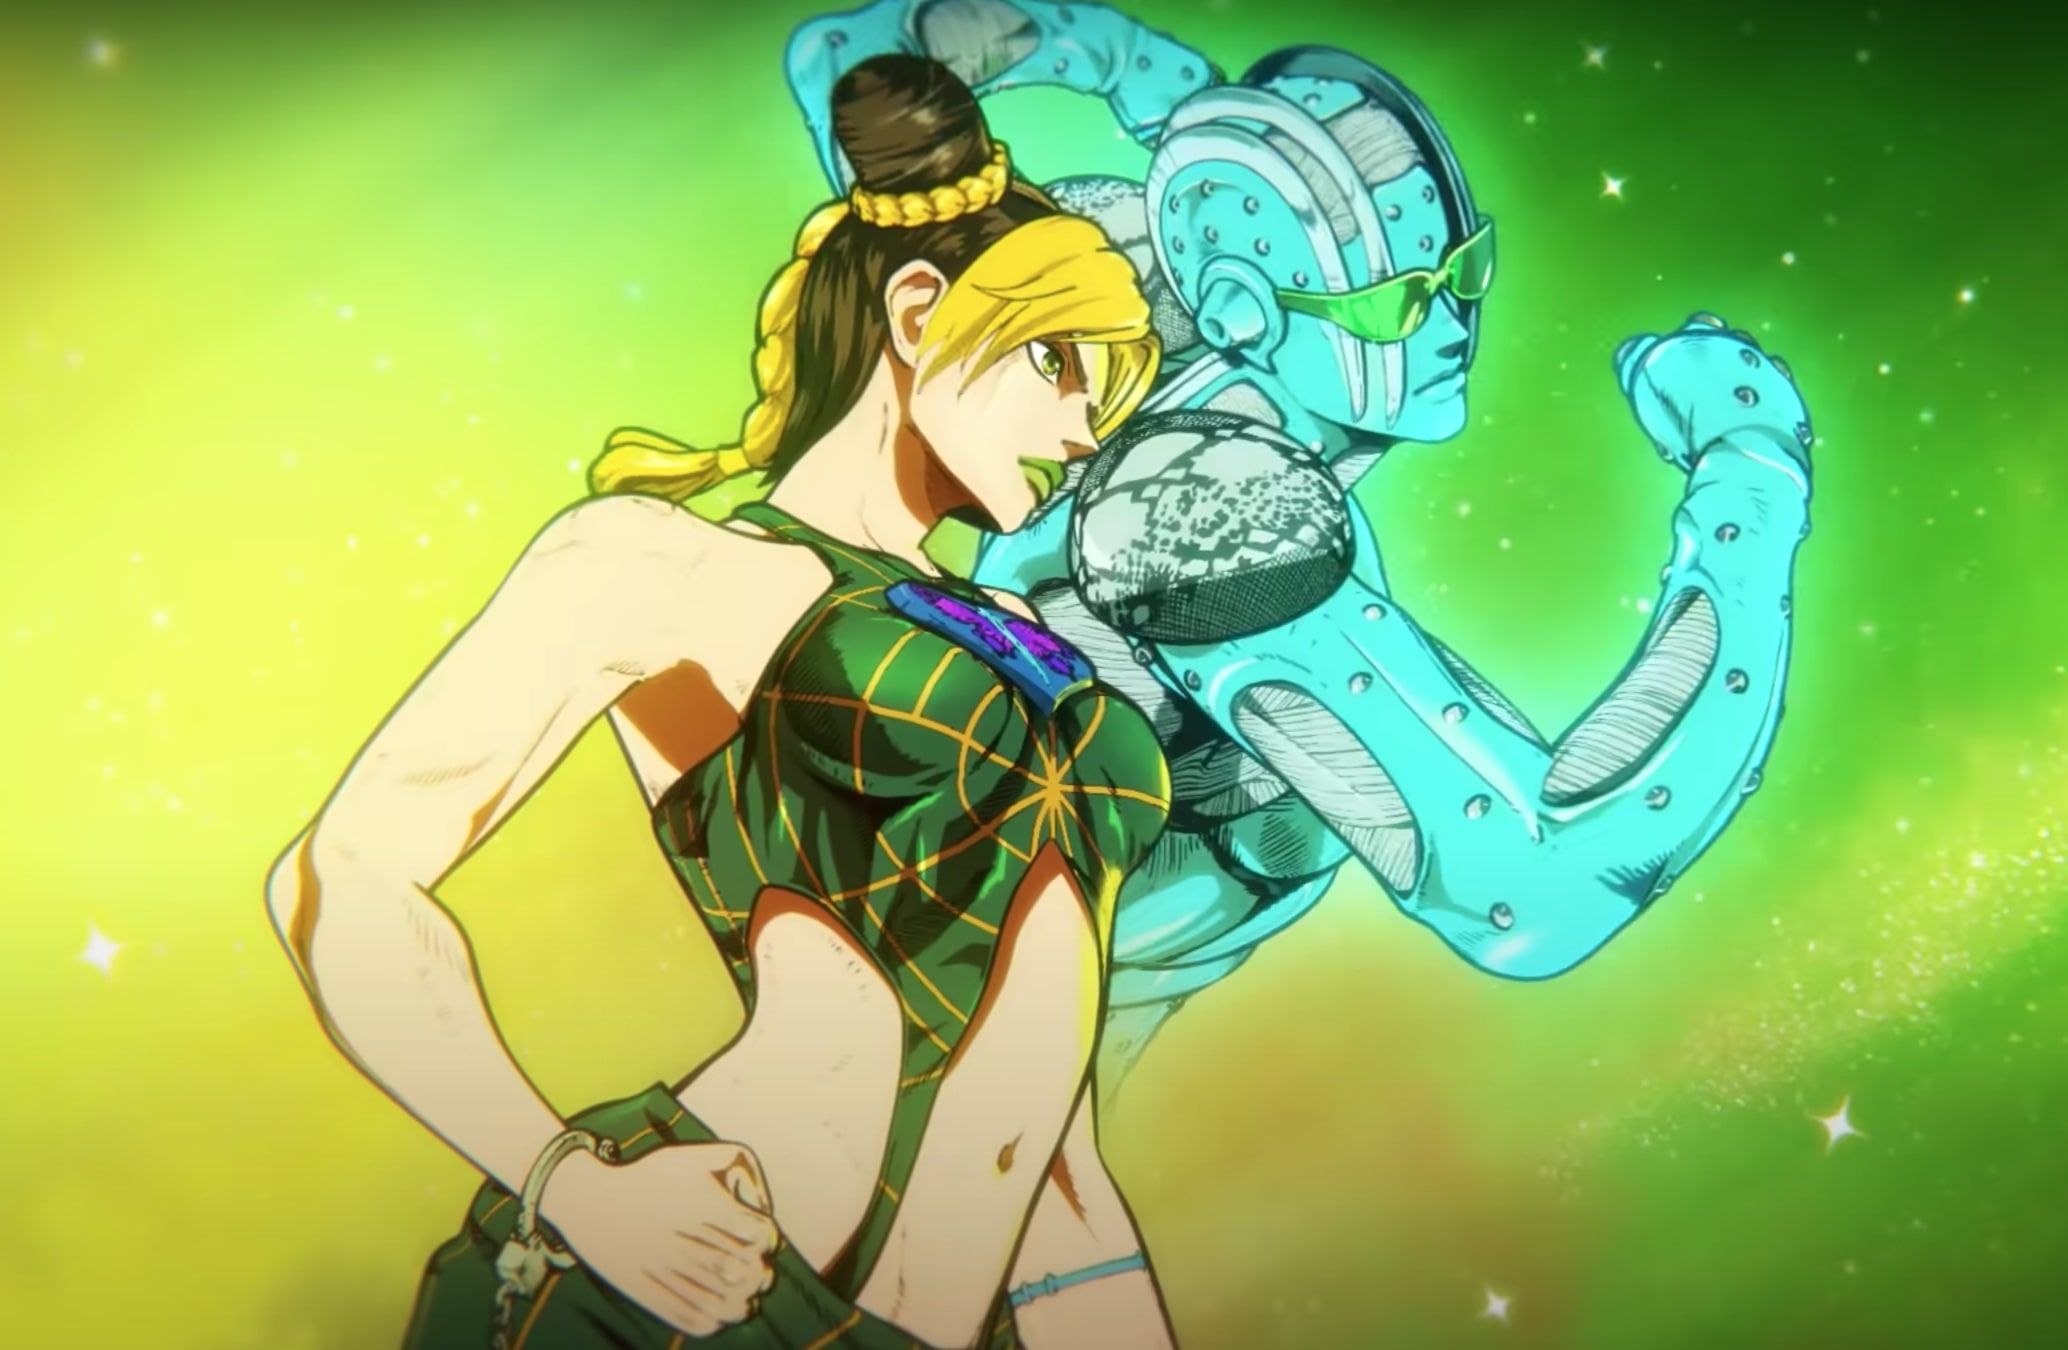 Stone Ocean Chapter 2  Release Date and Trailer Analysis  YouTube